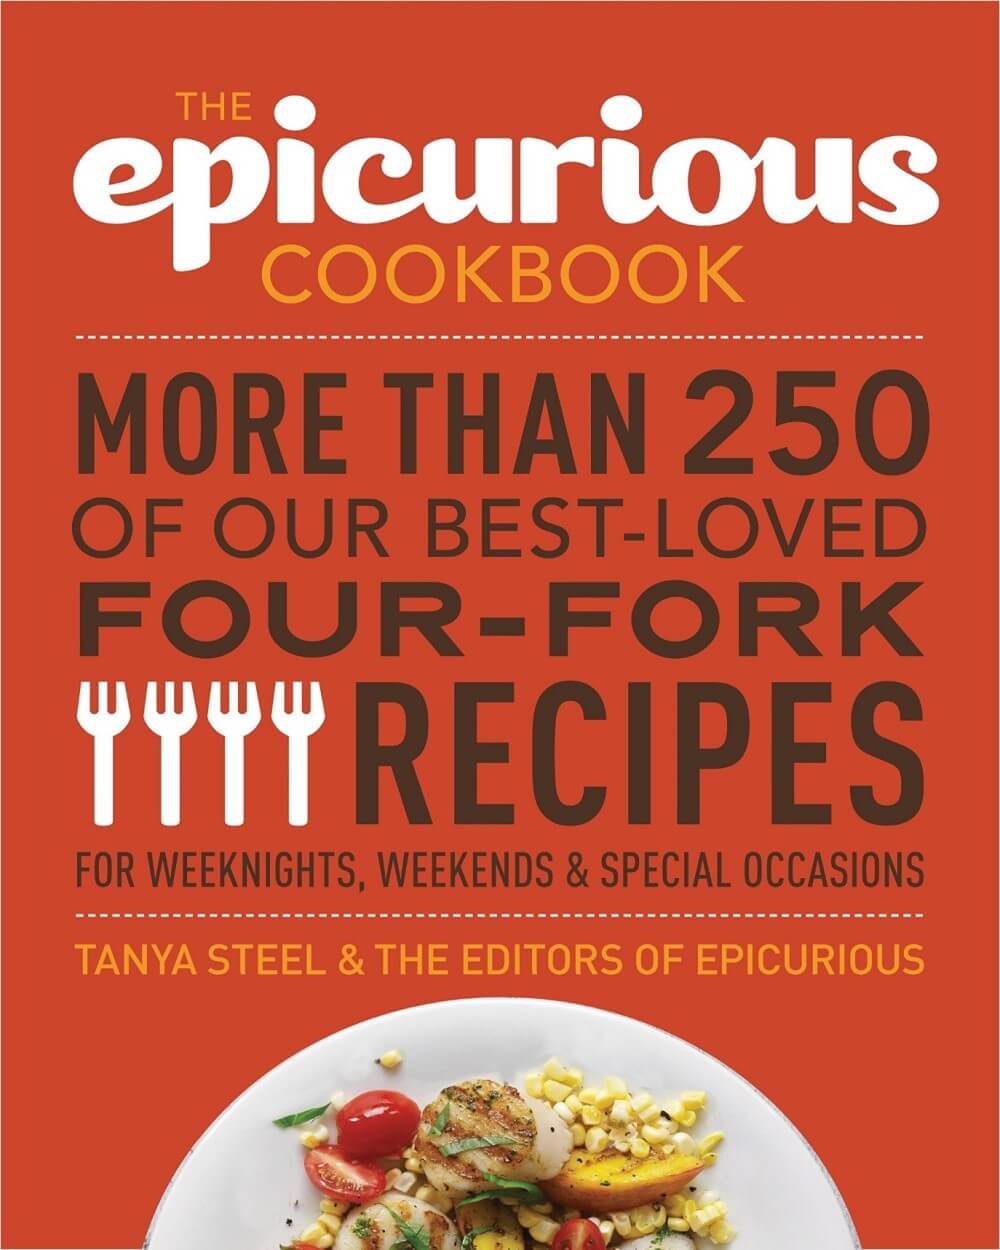 The Epicurious cook book